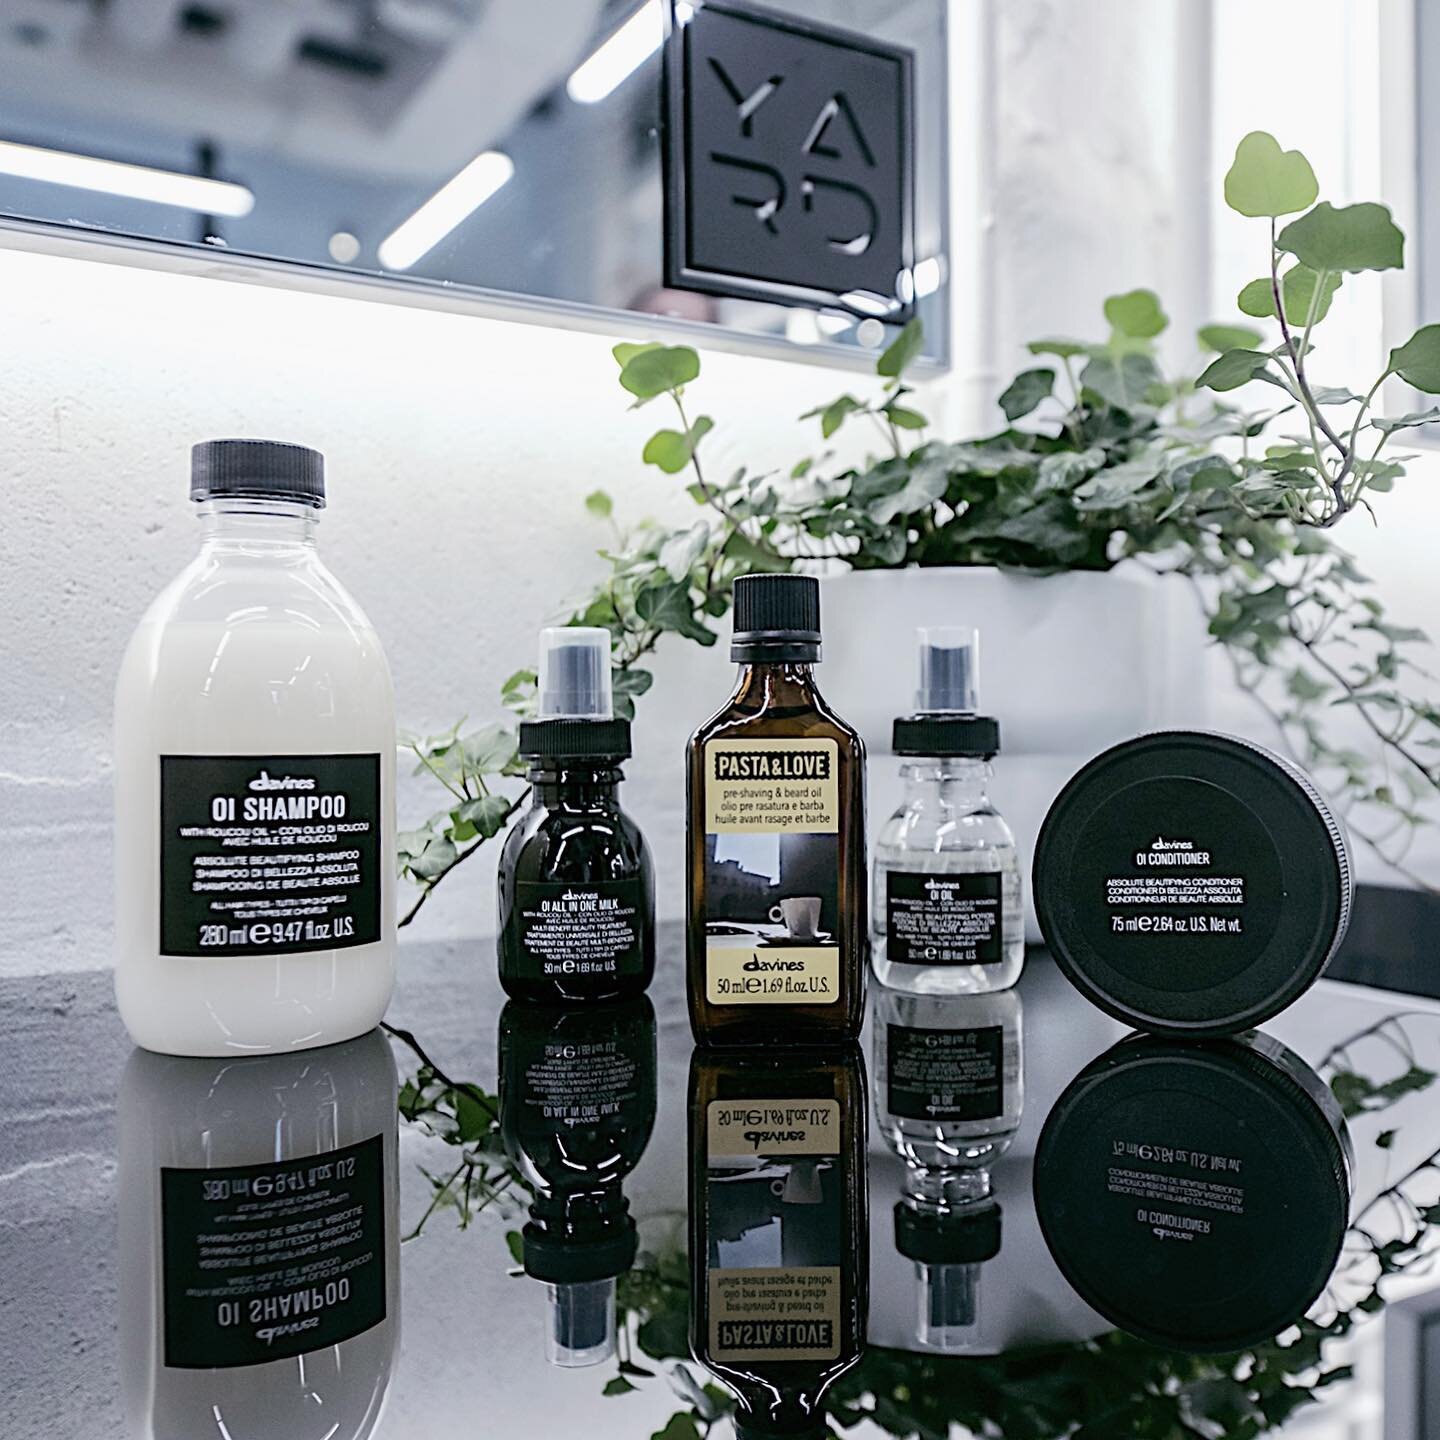 We use the best products on our clients -  Italian haircare brand @davinesarabia available for purchase in store